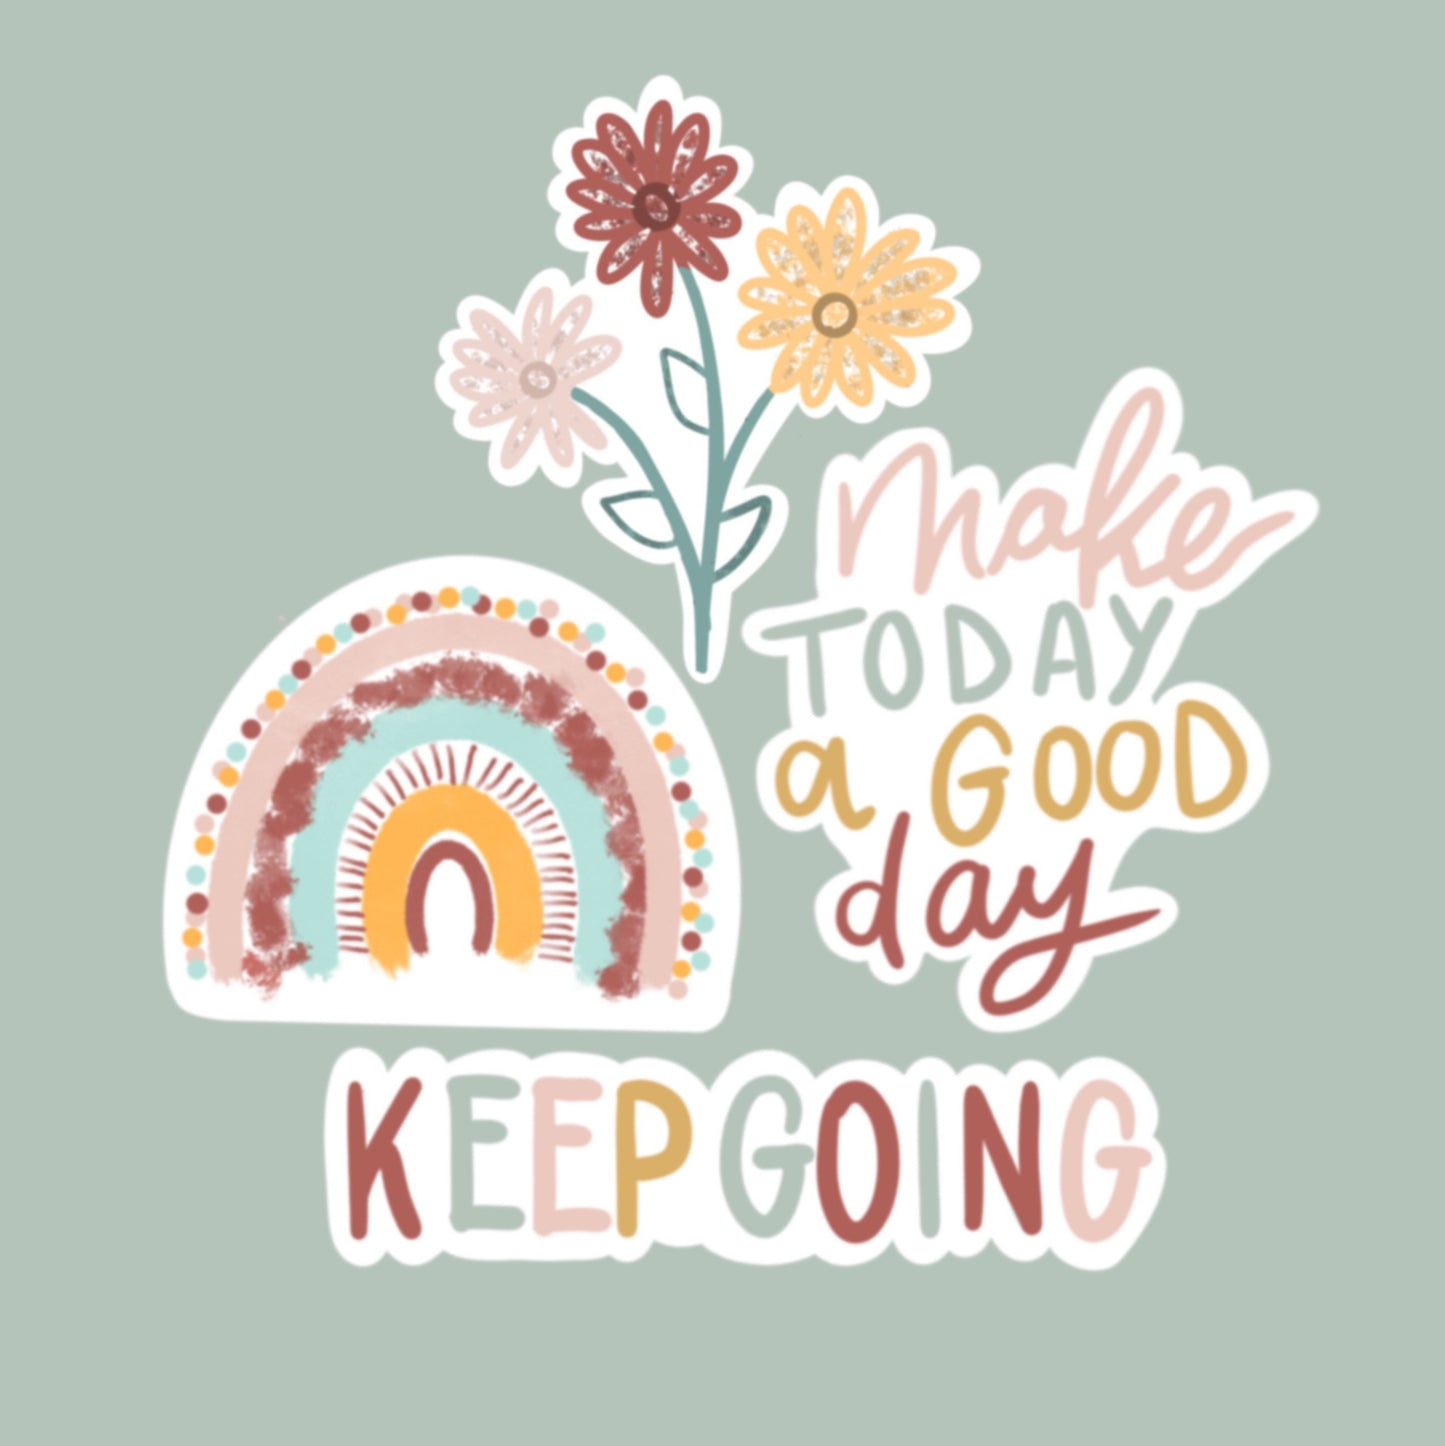 Motivational Sticker Pack - Colorful Dotted Watercolor Rainbow + Keep Going + Make Today a Good Day + Pink, Red, Yellow Flower Bunch